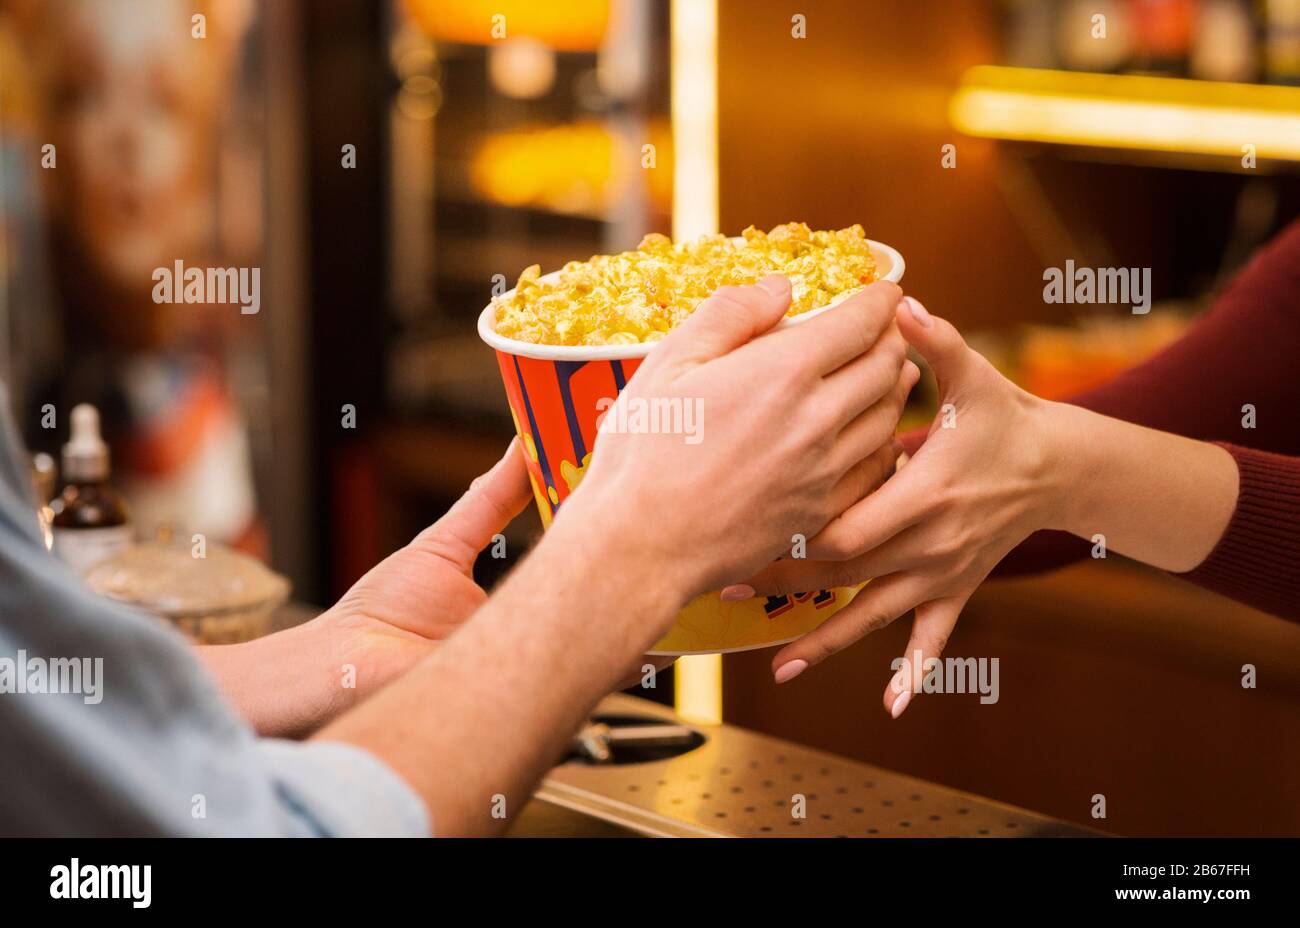 Young man buying popcorn from saleswoman in movie theater lobby, closeup of hands Stock Photo